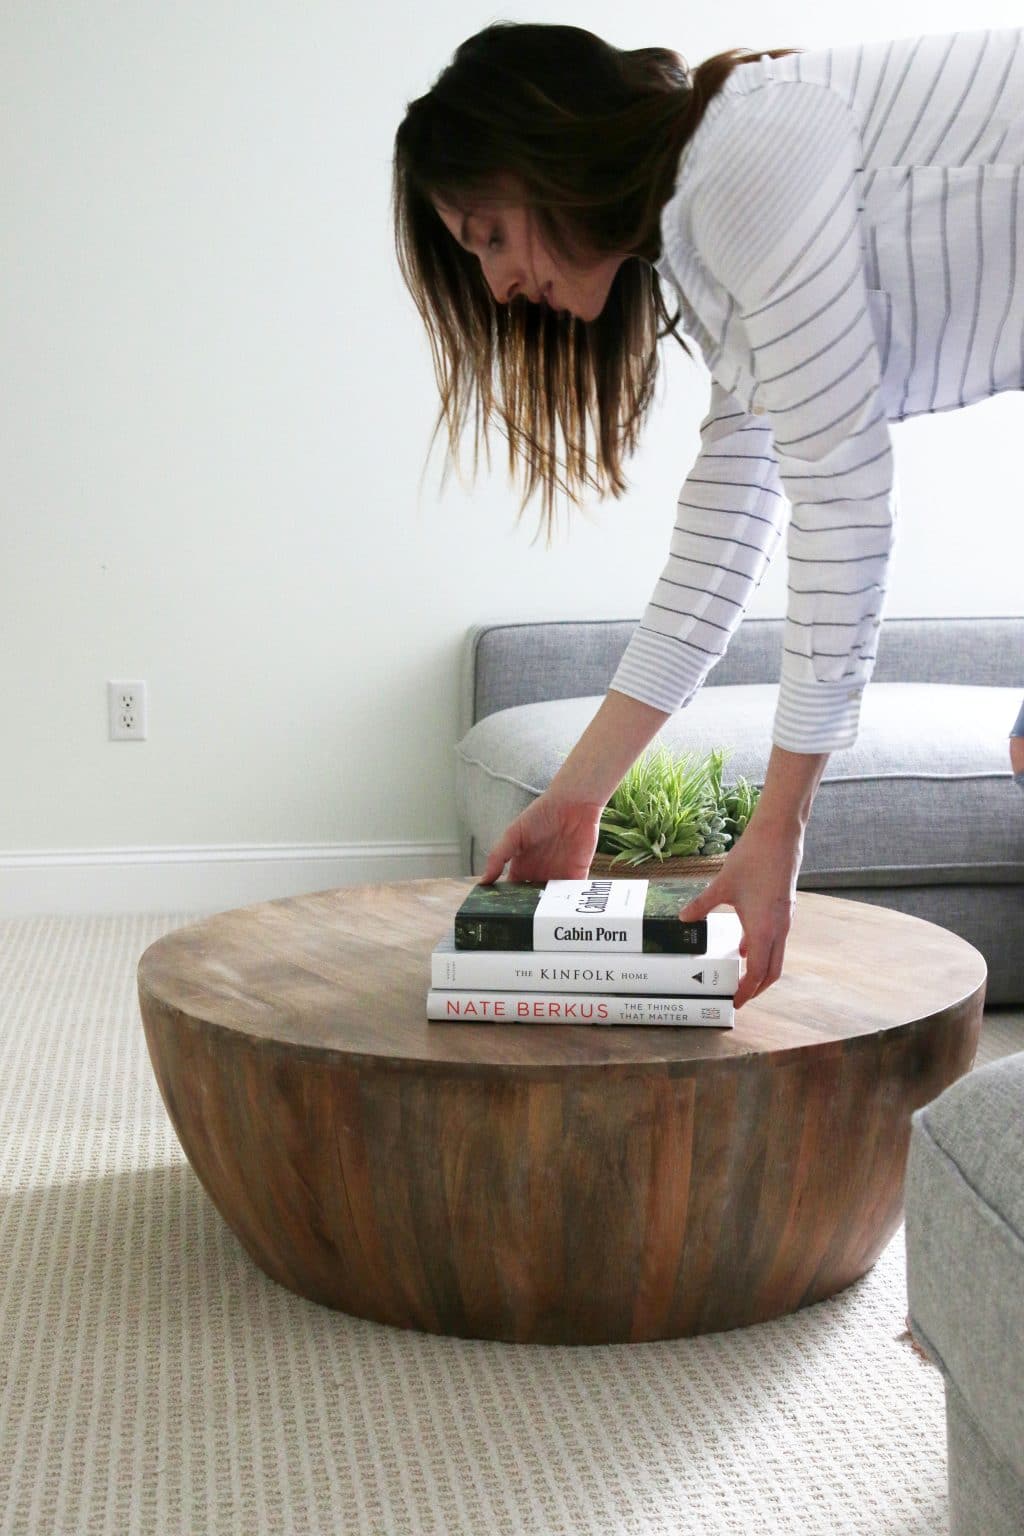 My Top 36 Coffee Table Books: The Most Versatile Home Decor - Chris Loves  Julia